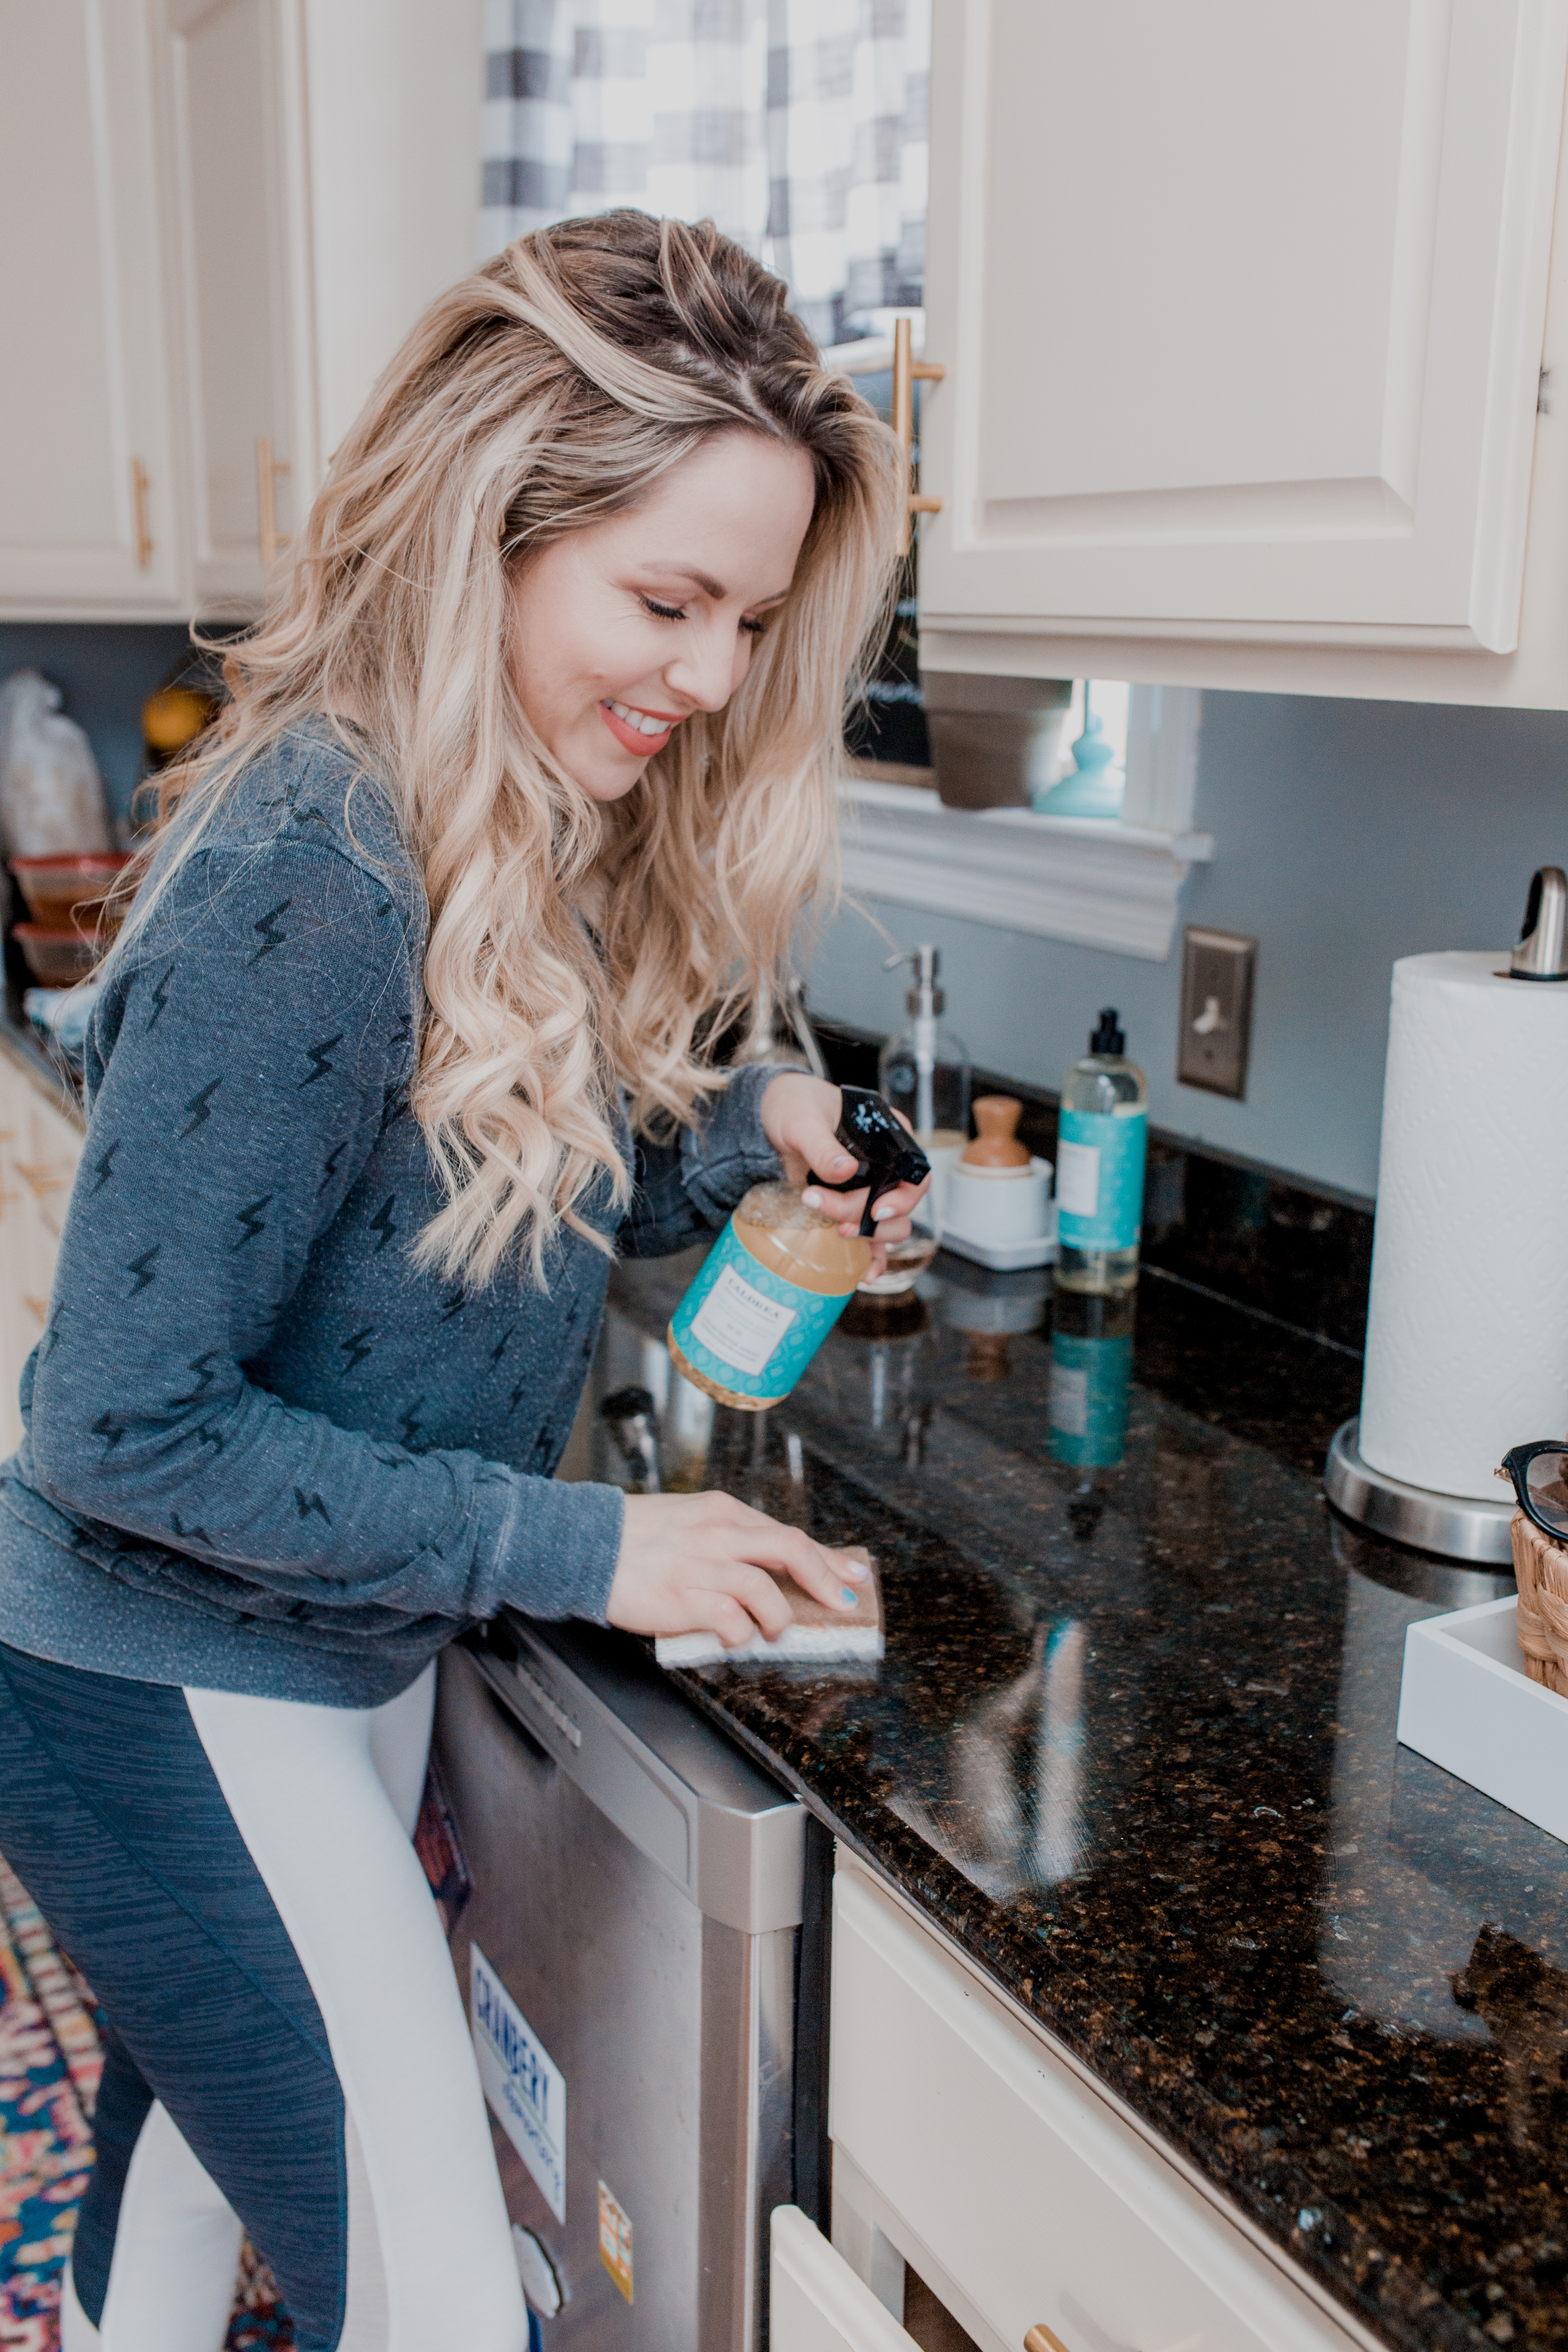 Grove Collaborative Products featured by top US lifestyle blog Nashville Wifestyles; Image of a woman cleaning. | The hardest part about cleaning is finding the right products for your home. Where to buy them? Where to find healthy products for your family? As a busy working mom, it's overwhelming to shop. I’ve been a customer of Grove Collaborative products for a year and I trust they vet the brands to make sure they're good for my home. It makes living a healthy lifestyle easier. No more going through the grocery aisles, now I can let it arrive at my door. Click to learn more!